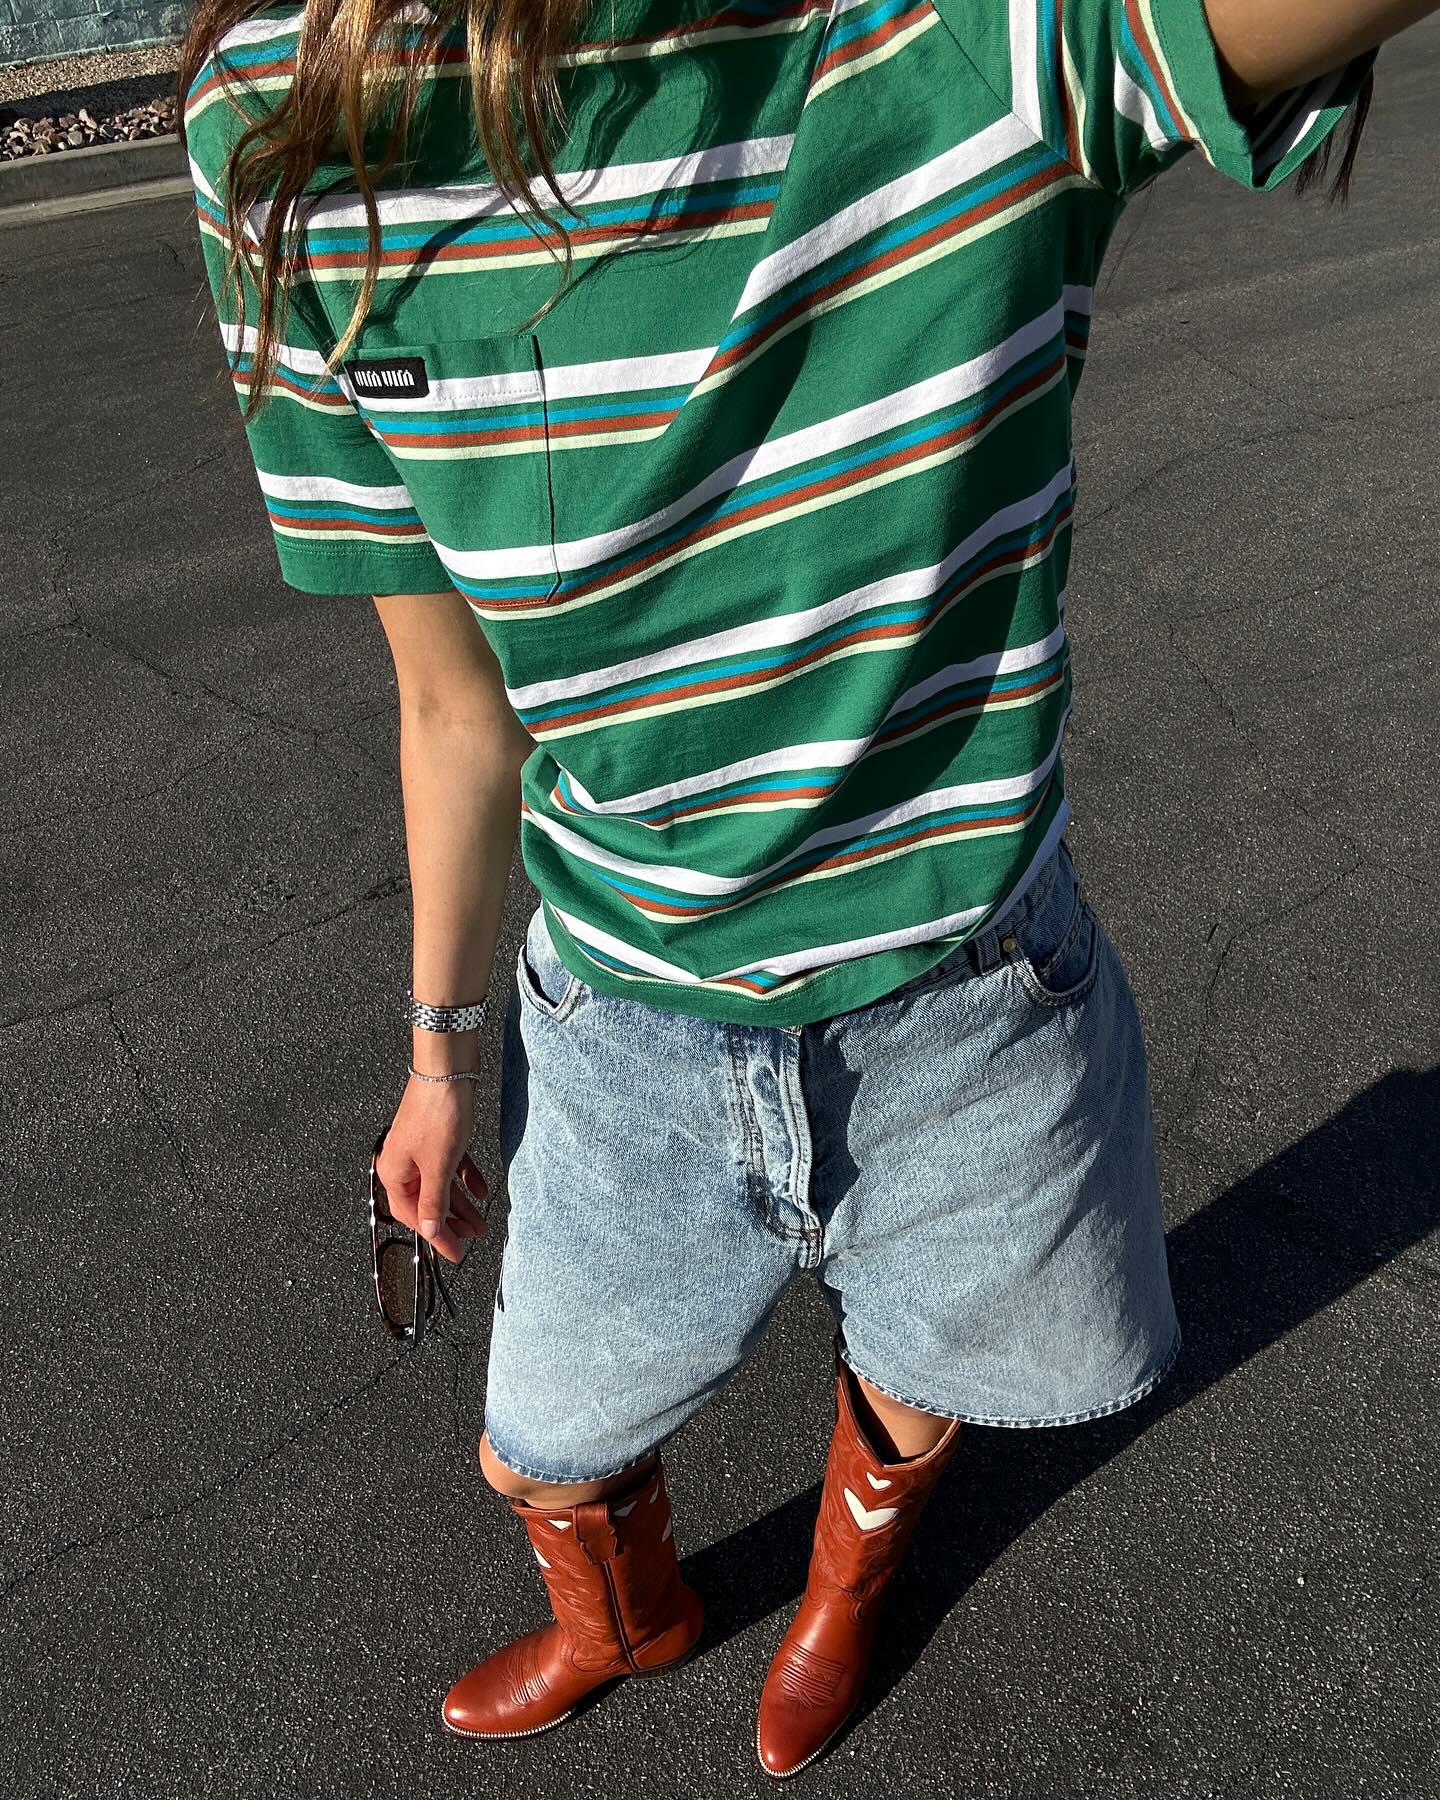 Cowboy boots styled with a striped T-shirt